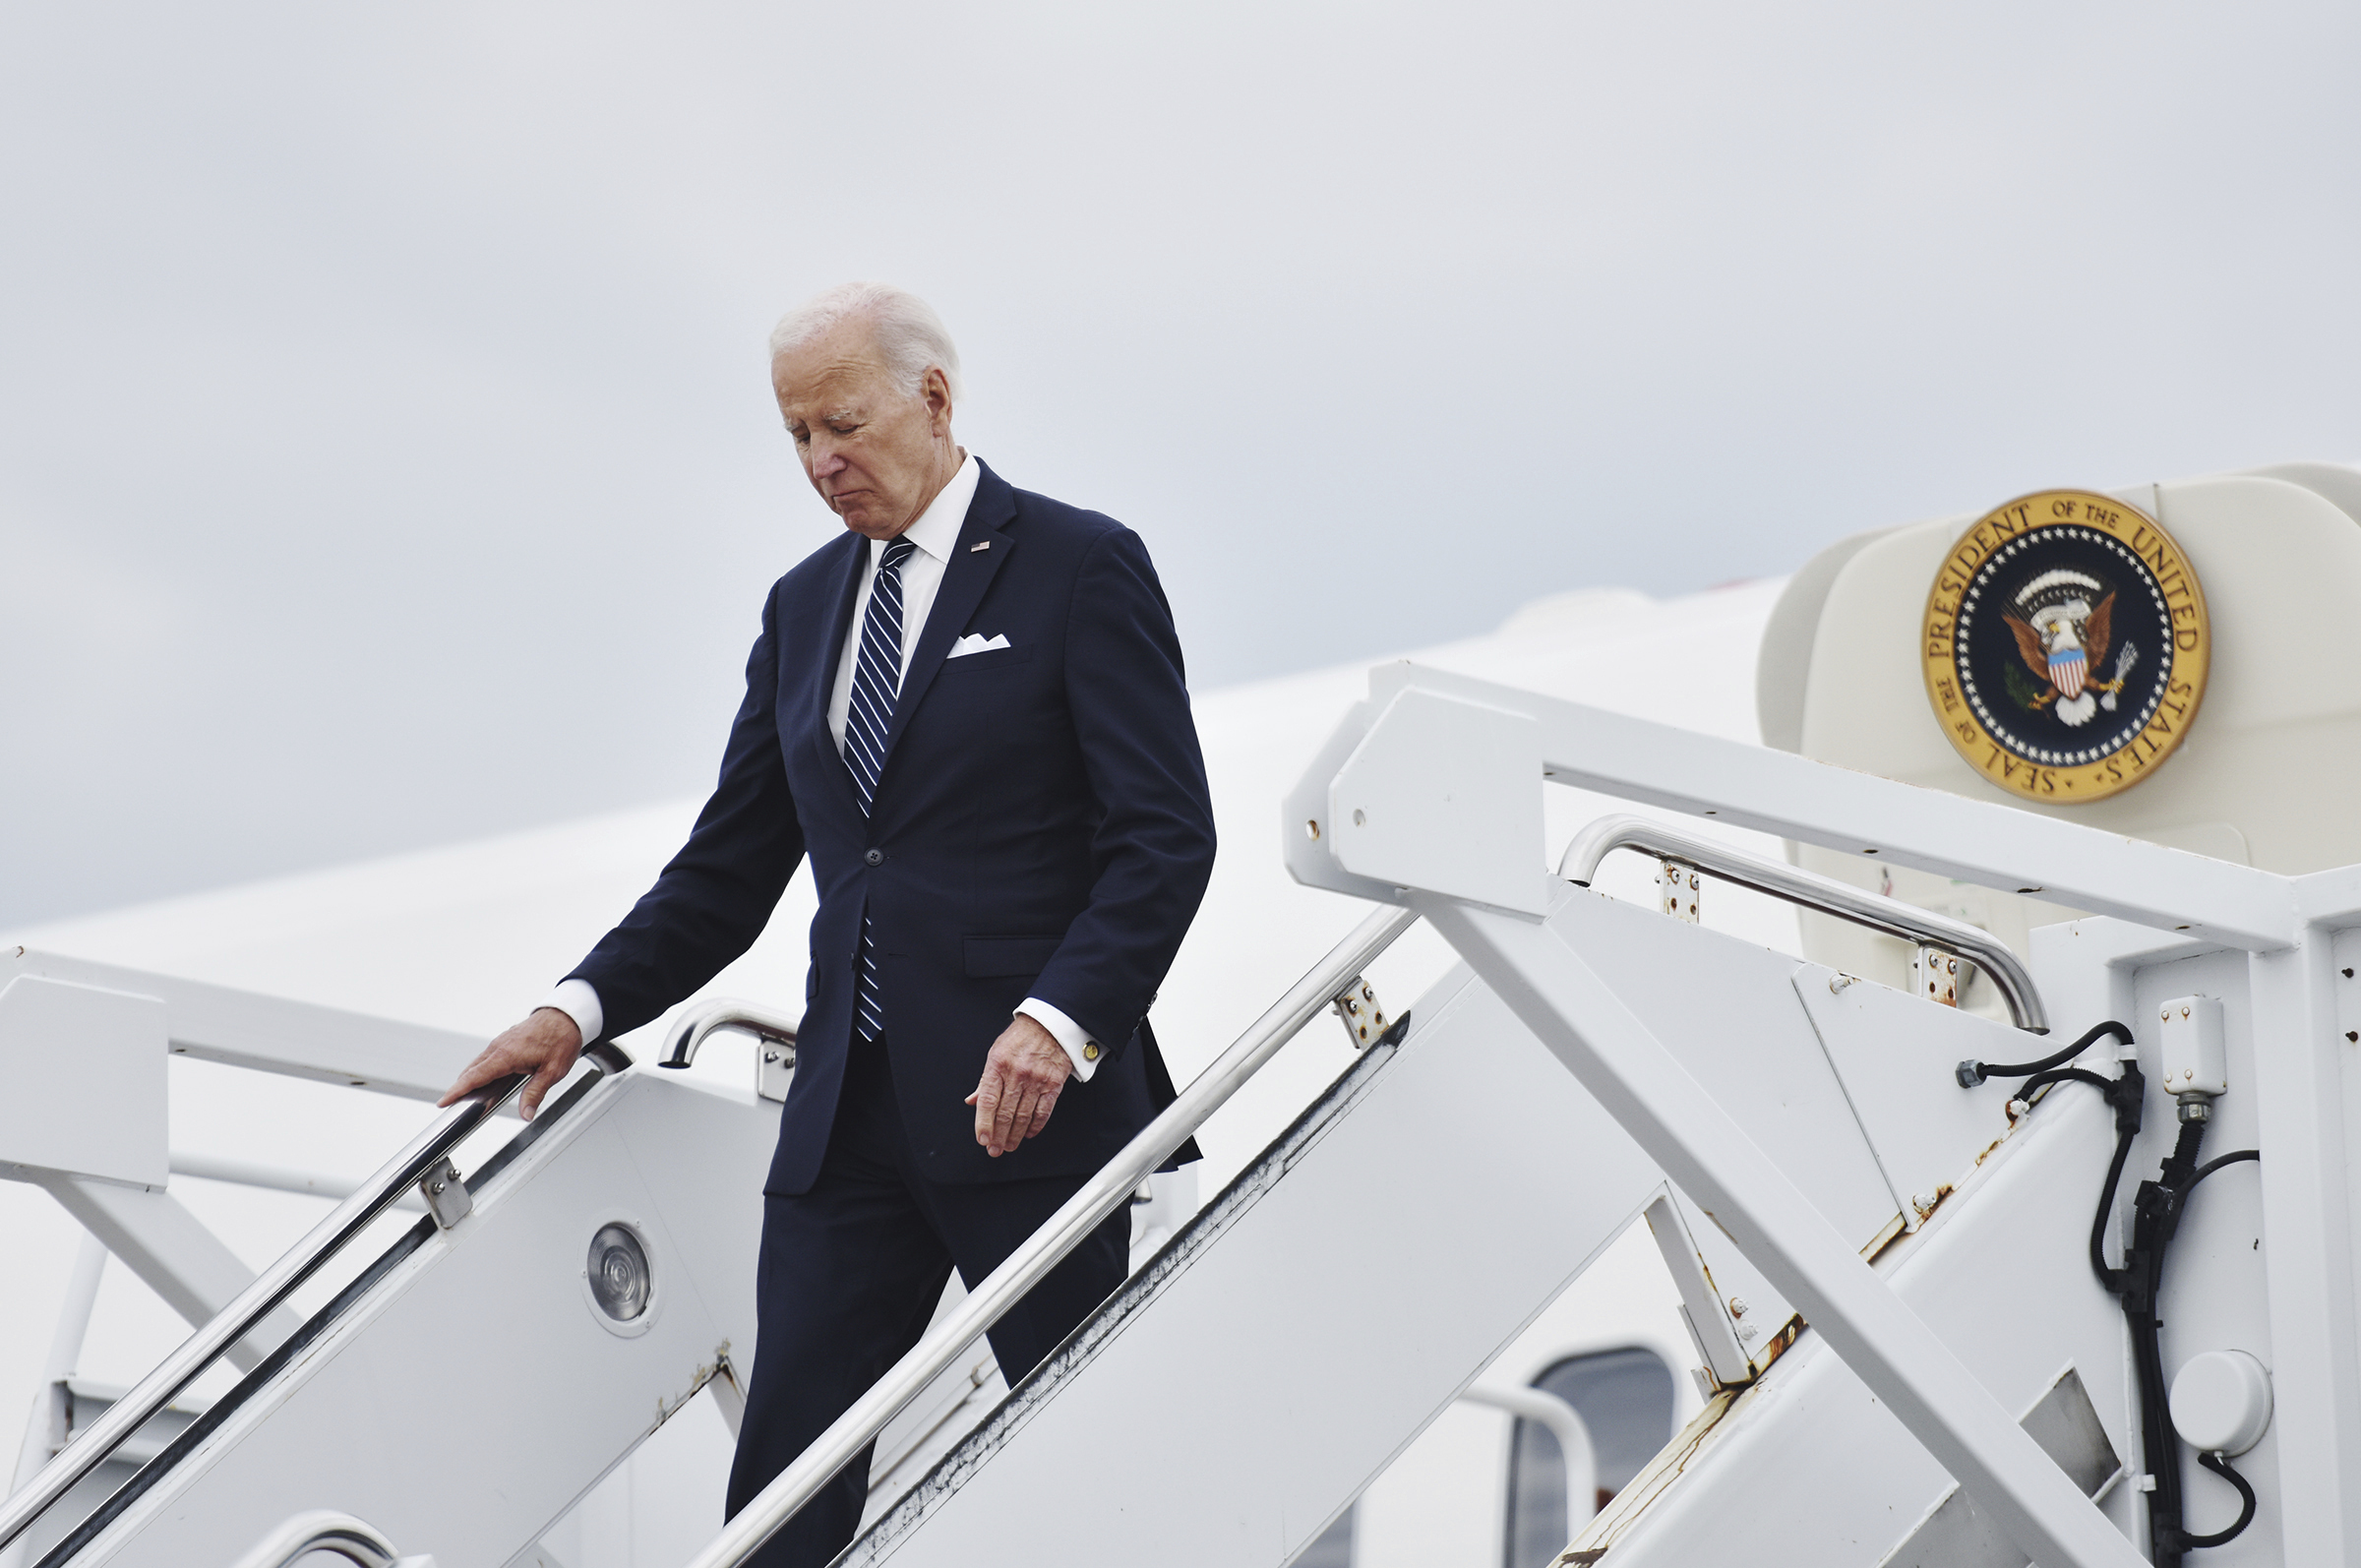 President Biden steps down from Air Force One after landing at the Wilkes-Barre/Scranton Internatio...